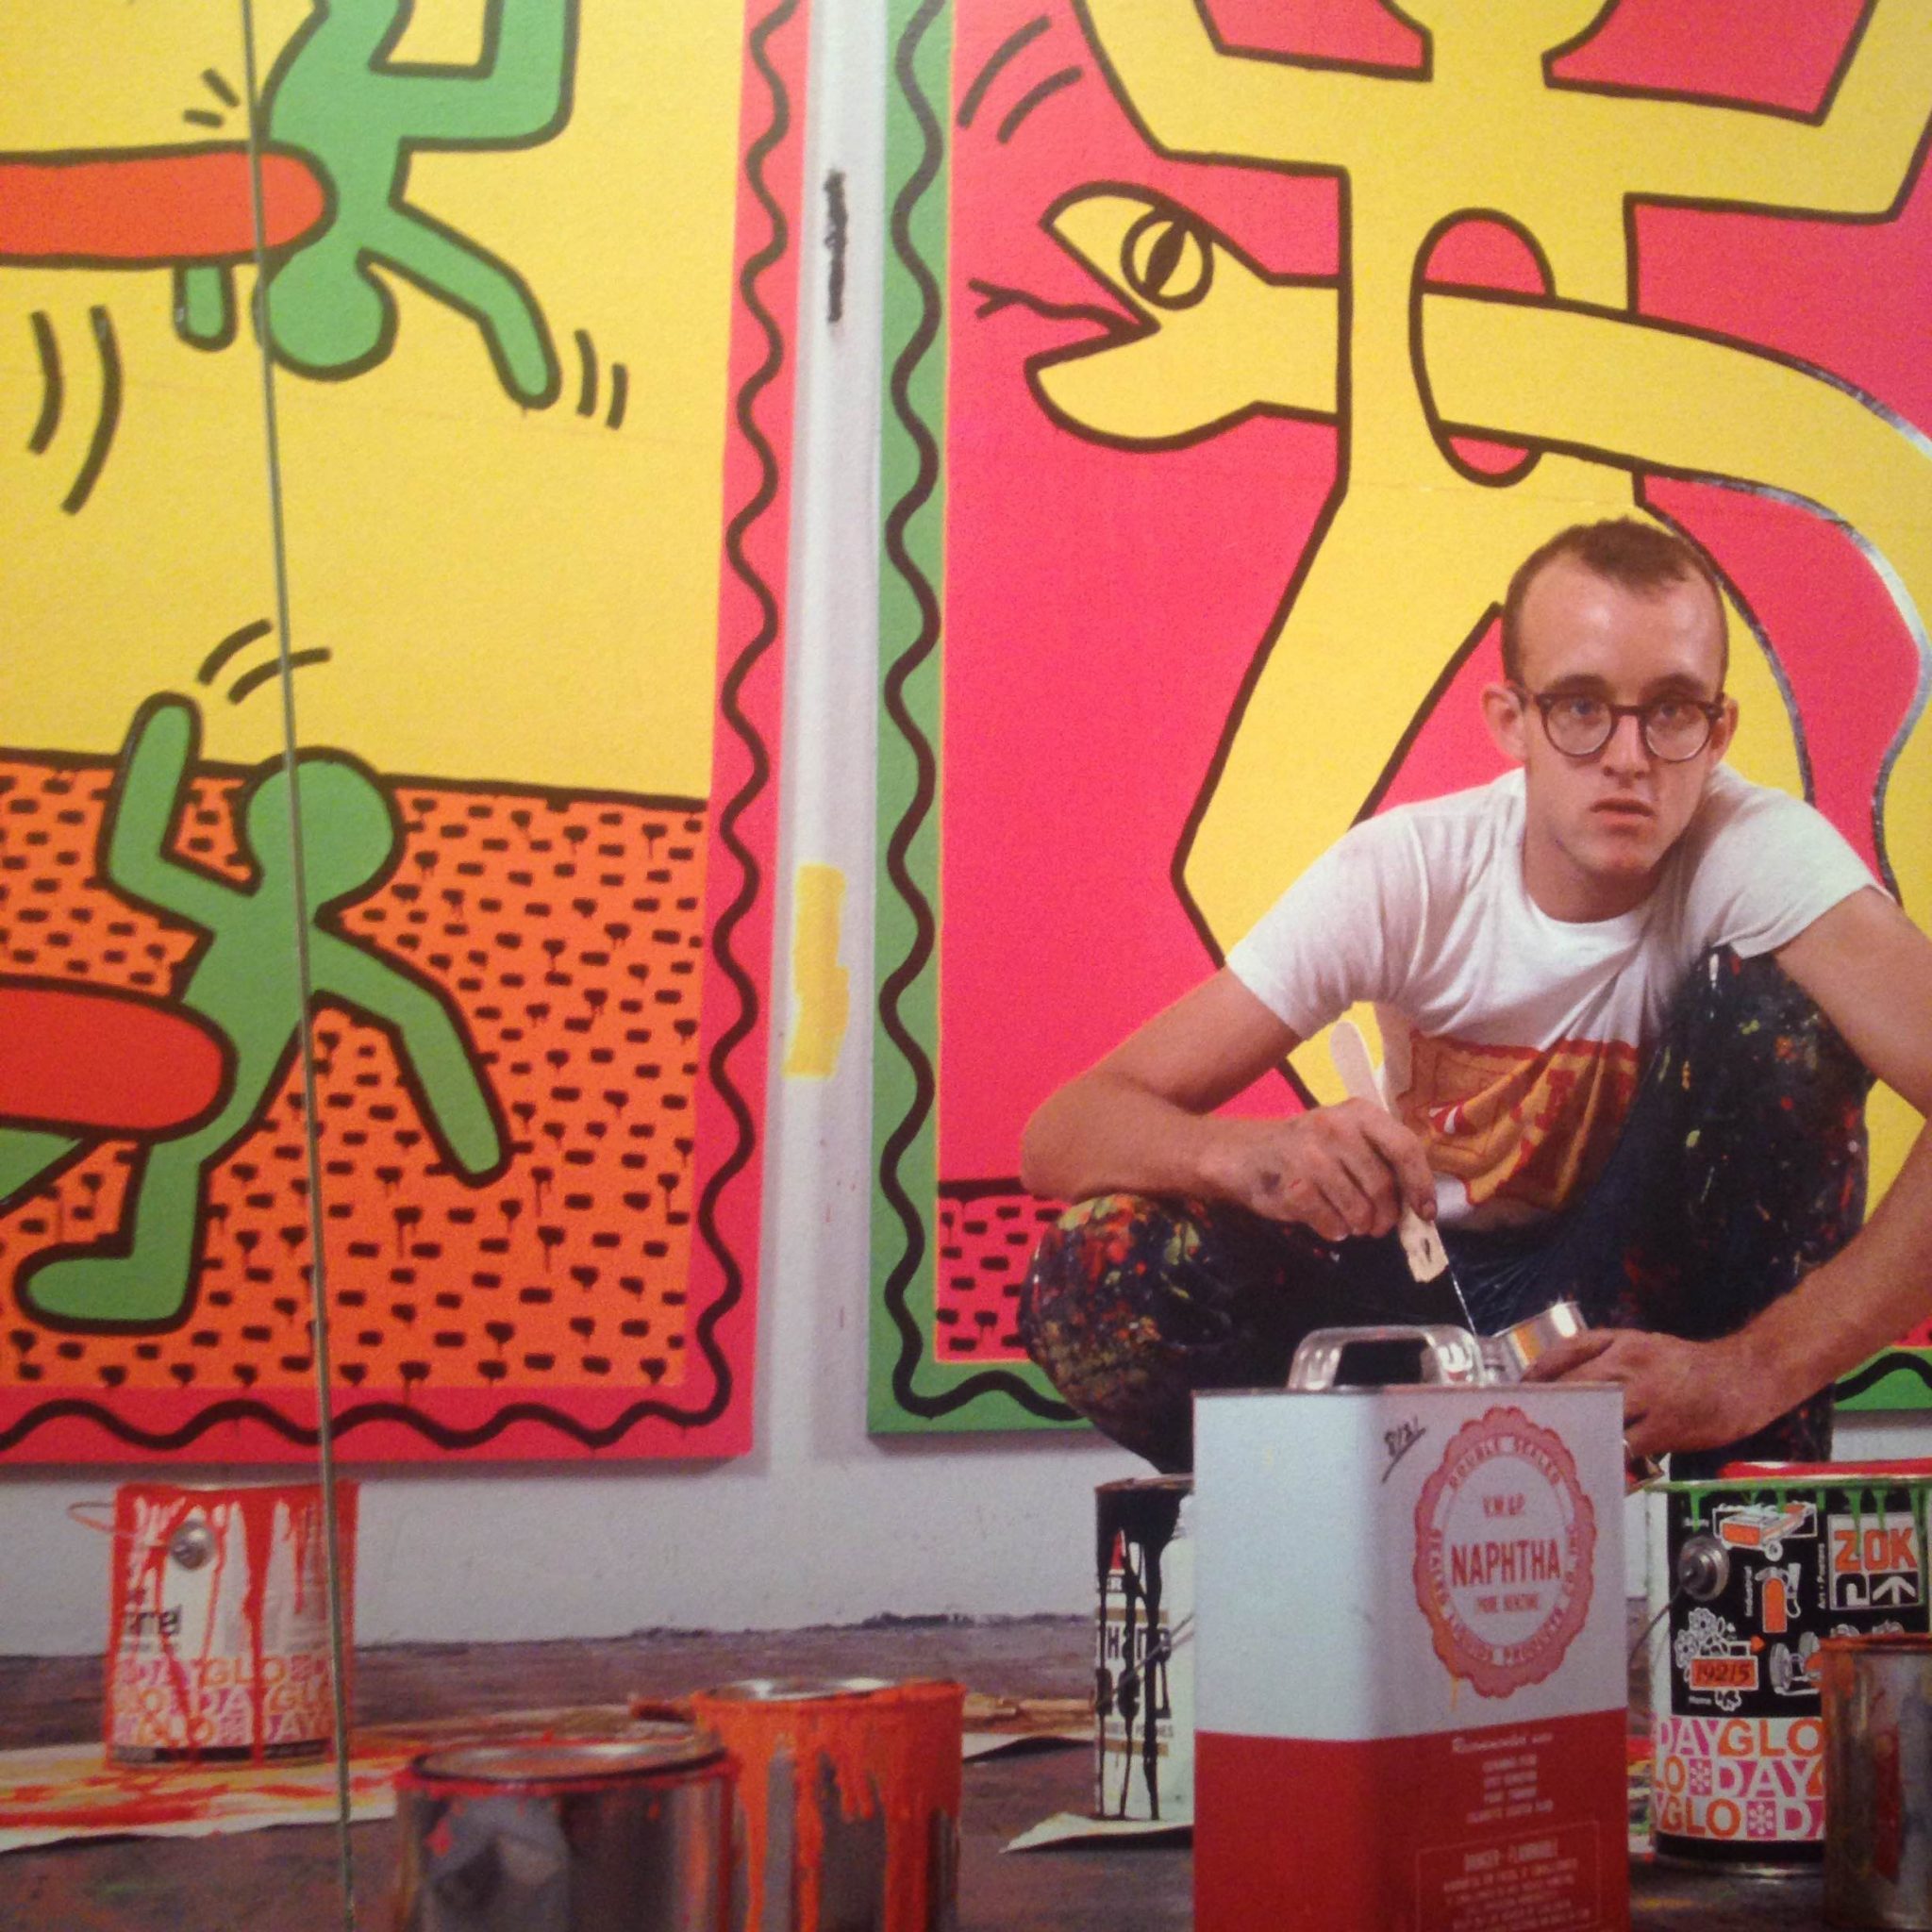 Keith Haring, Emblematic Artist of the 20th Century